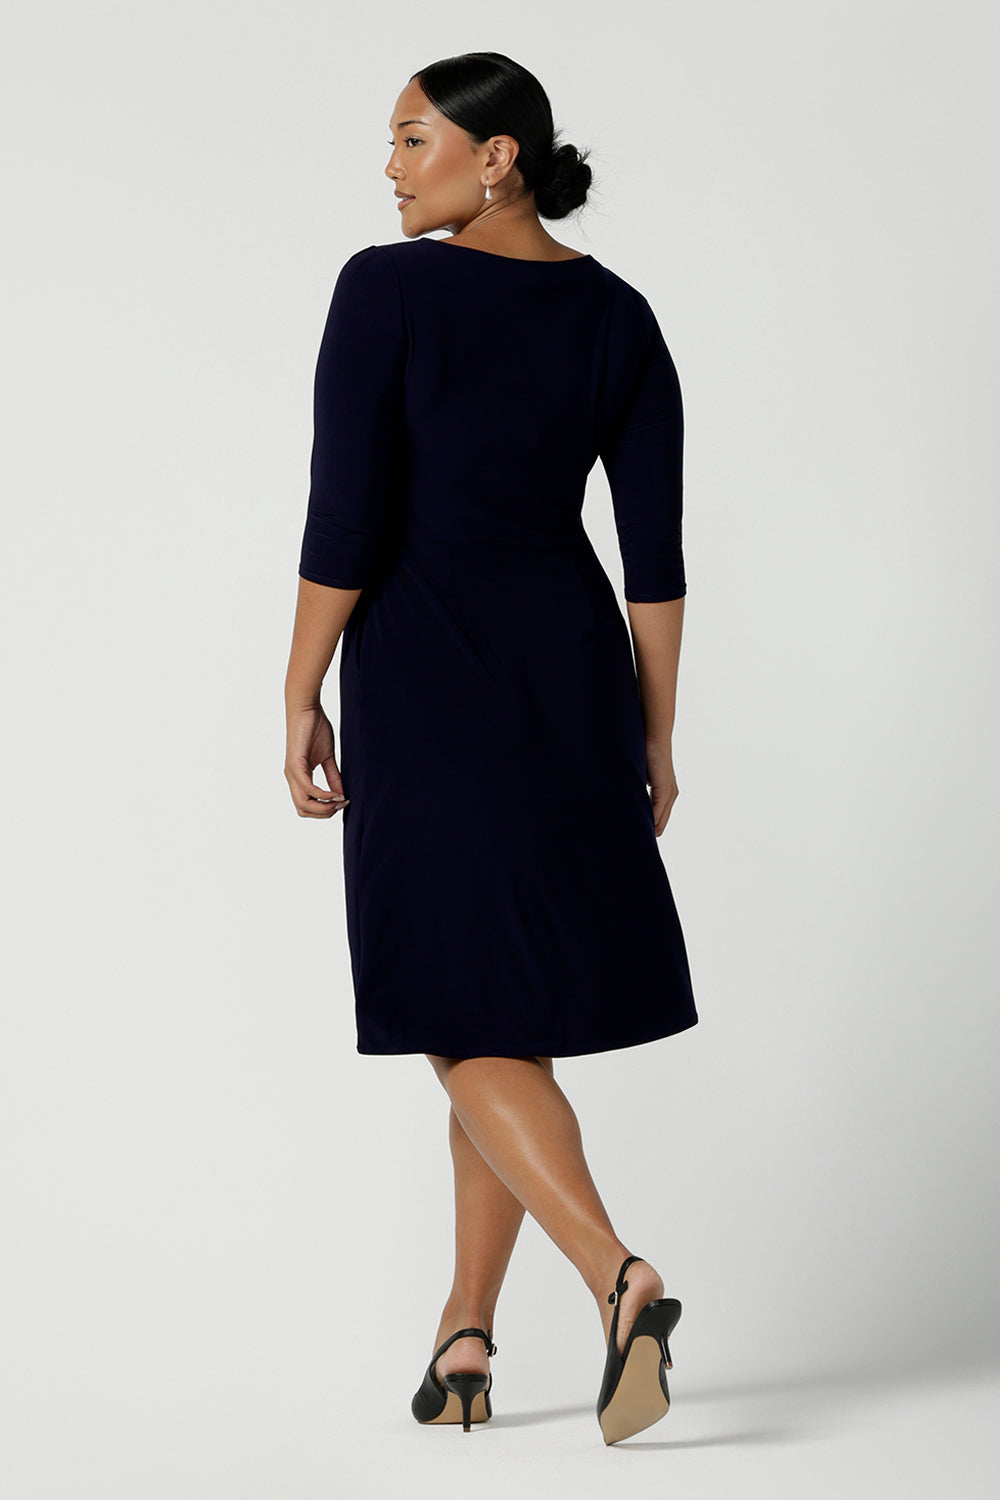 Back view of a size 10 woman wears the Audrey Shift Dress in Navy is the perfect all season shift dress. Soft jersey fabric, 3/4 sleeves and pockets. Made in Australia for women size 8 - 24.